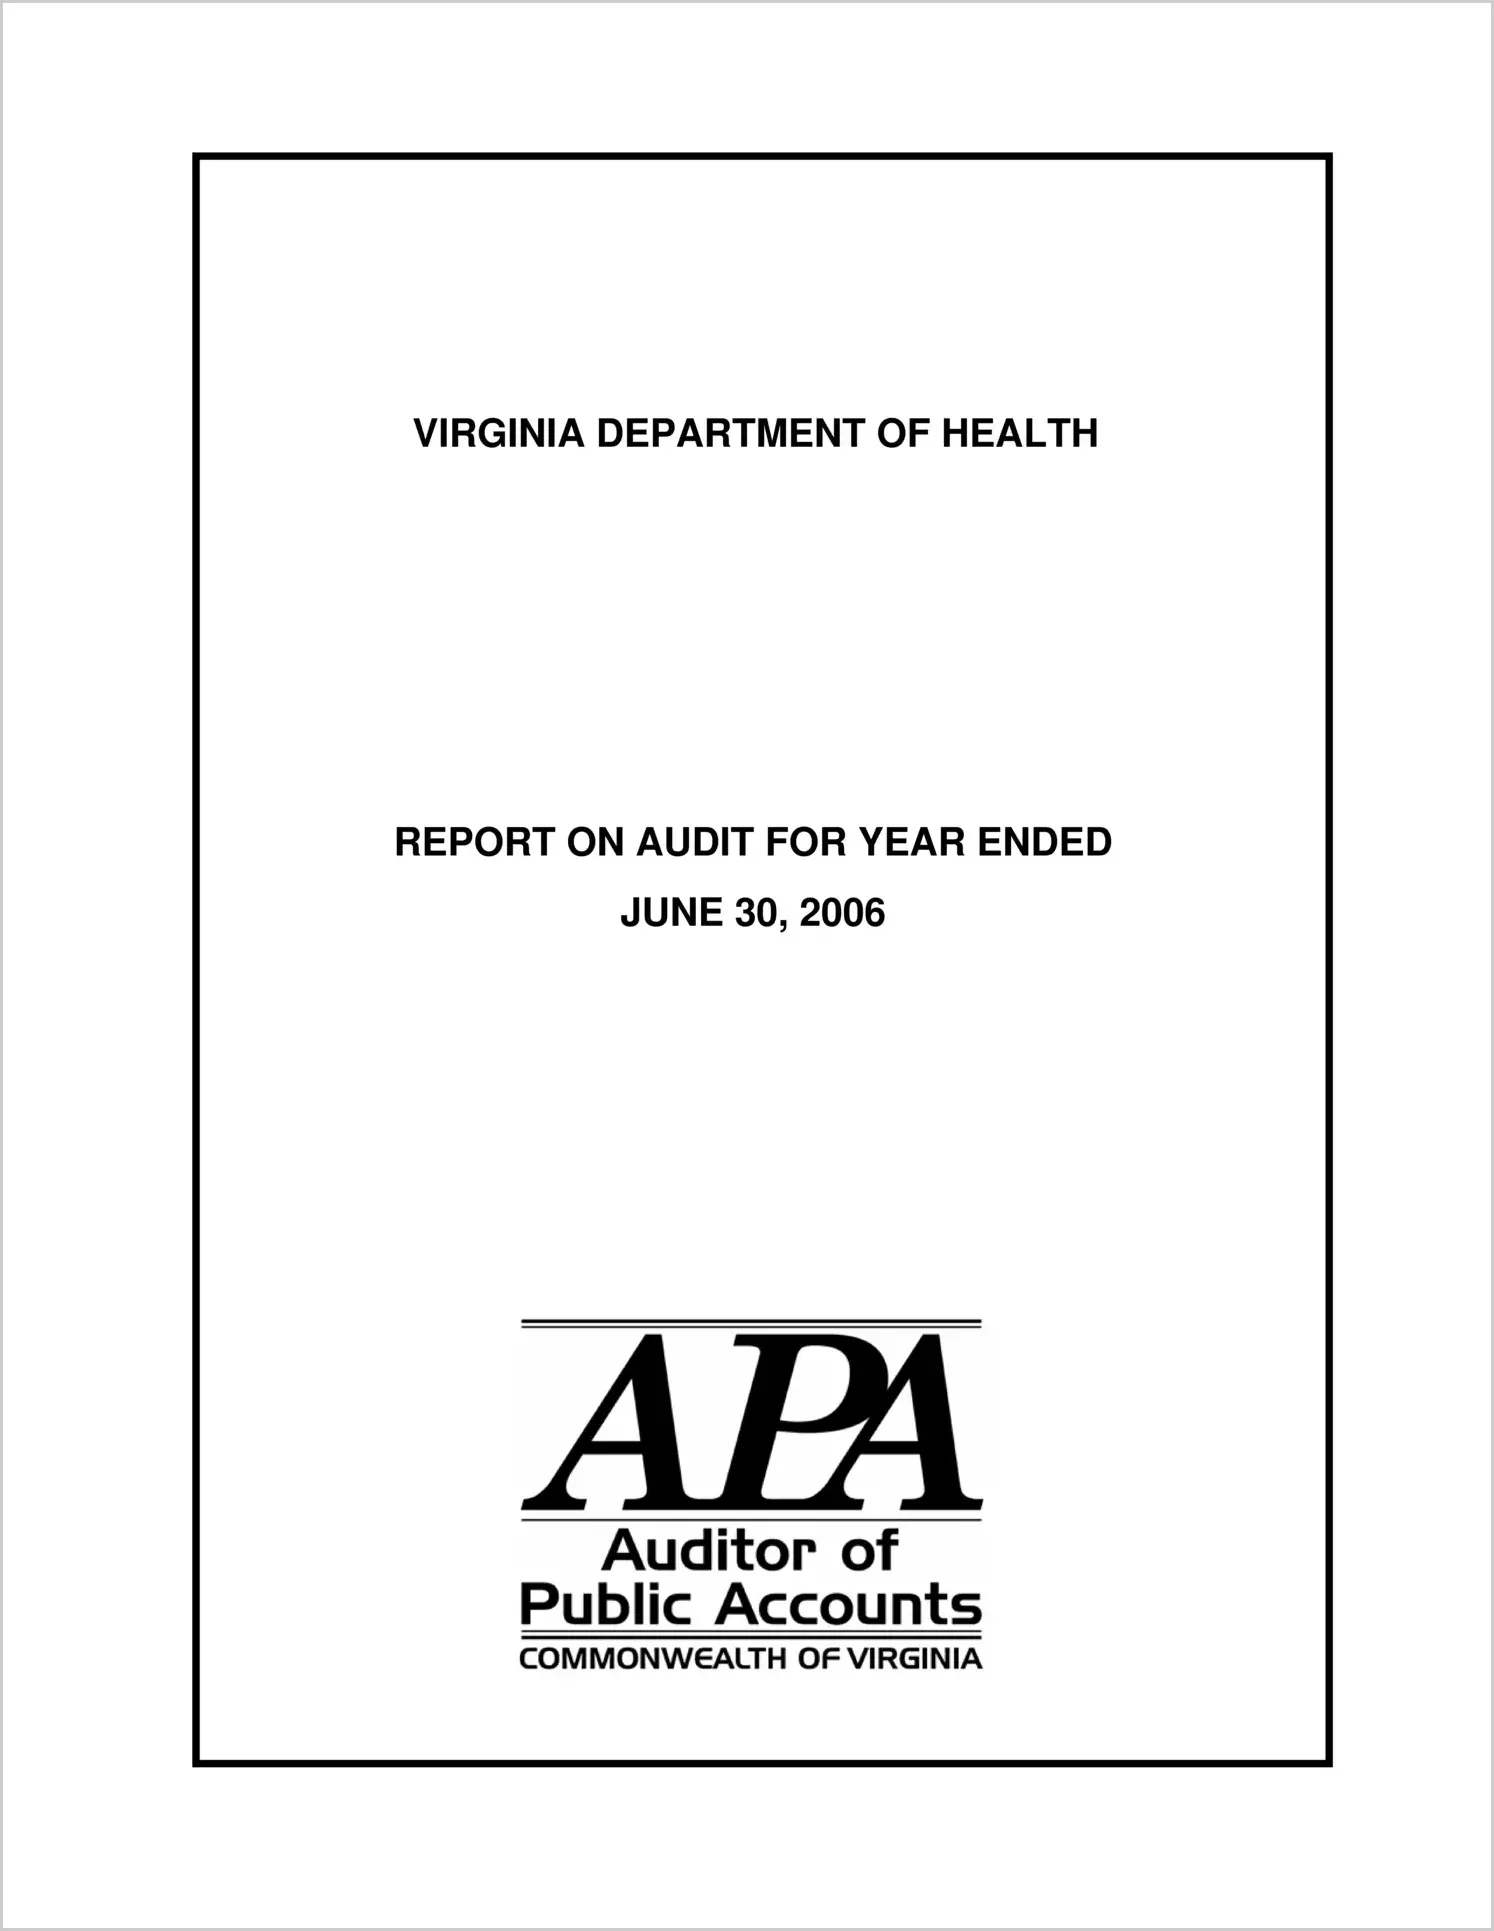 Department of Health for the year ended June 30, 2006